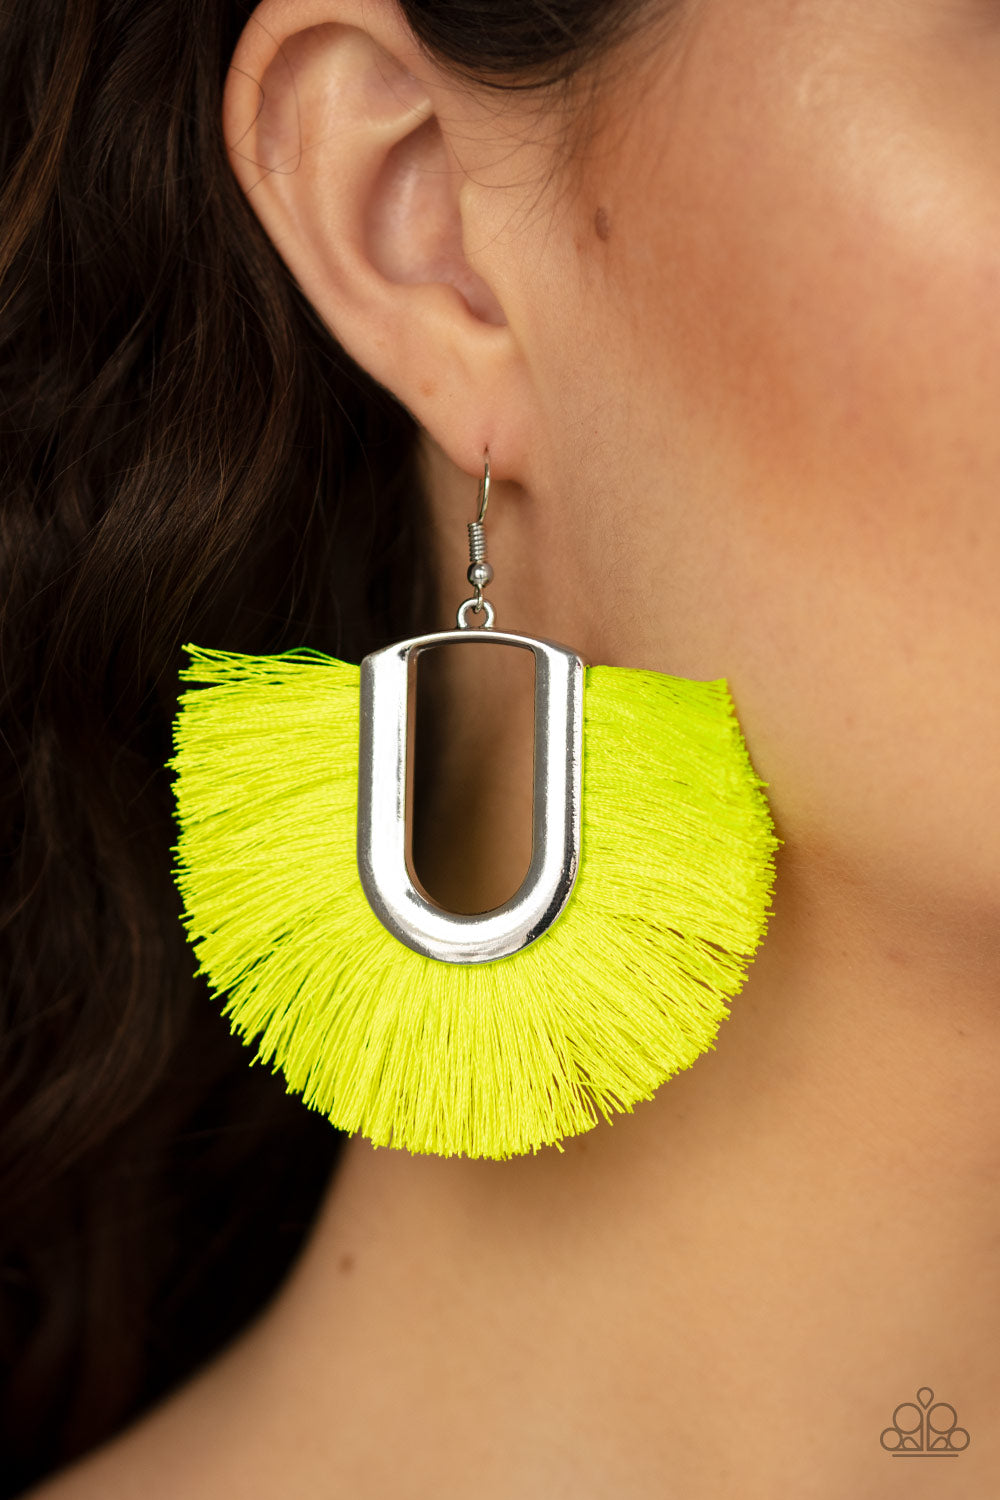 Yellow Chimes Earrings Silver Oxidised Western Looks Green Fabric Tassel  Earrings Silver Online in India, Buy at Best Price from Firstcry.com -  13317331